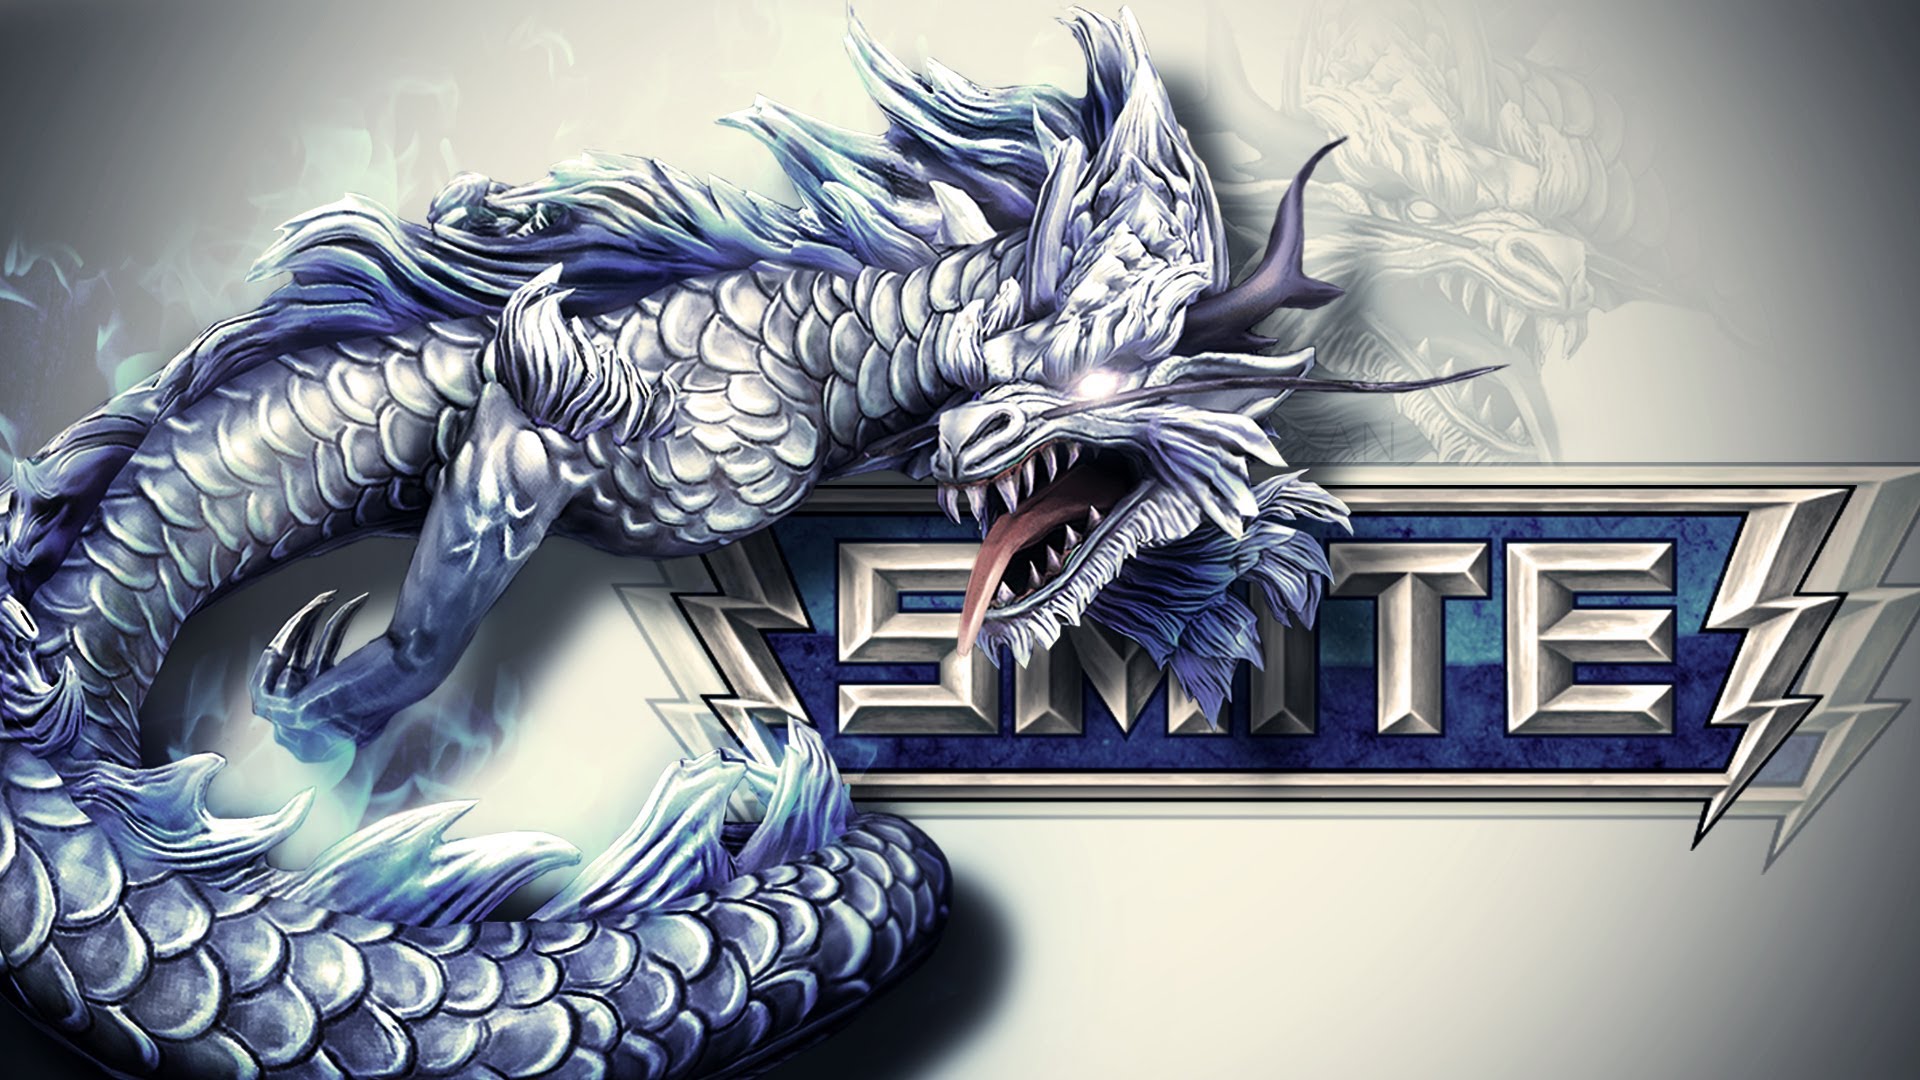 Smite HD wallpapers free download